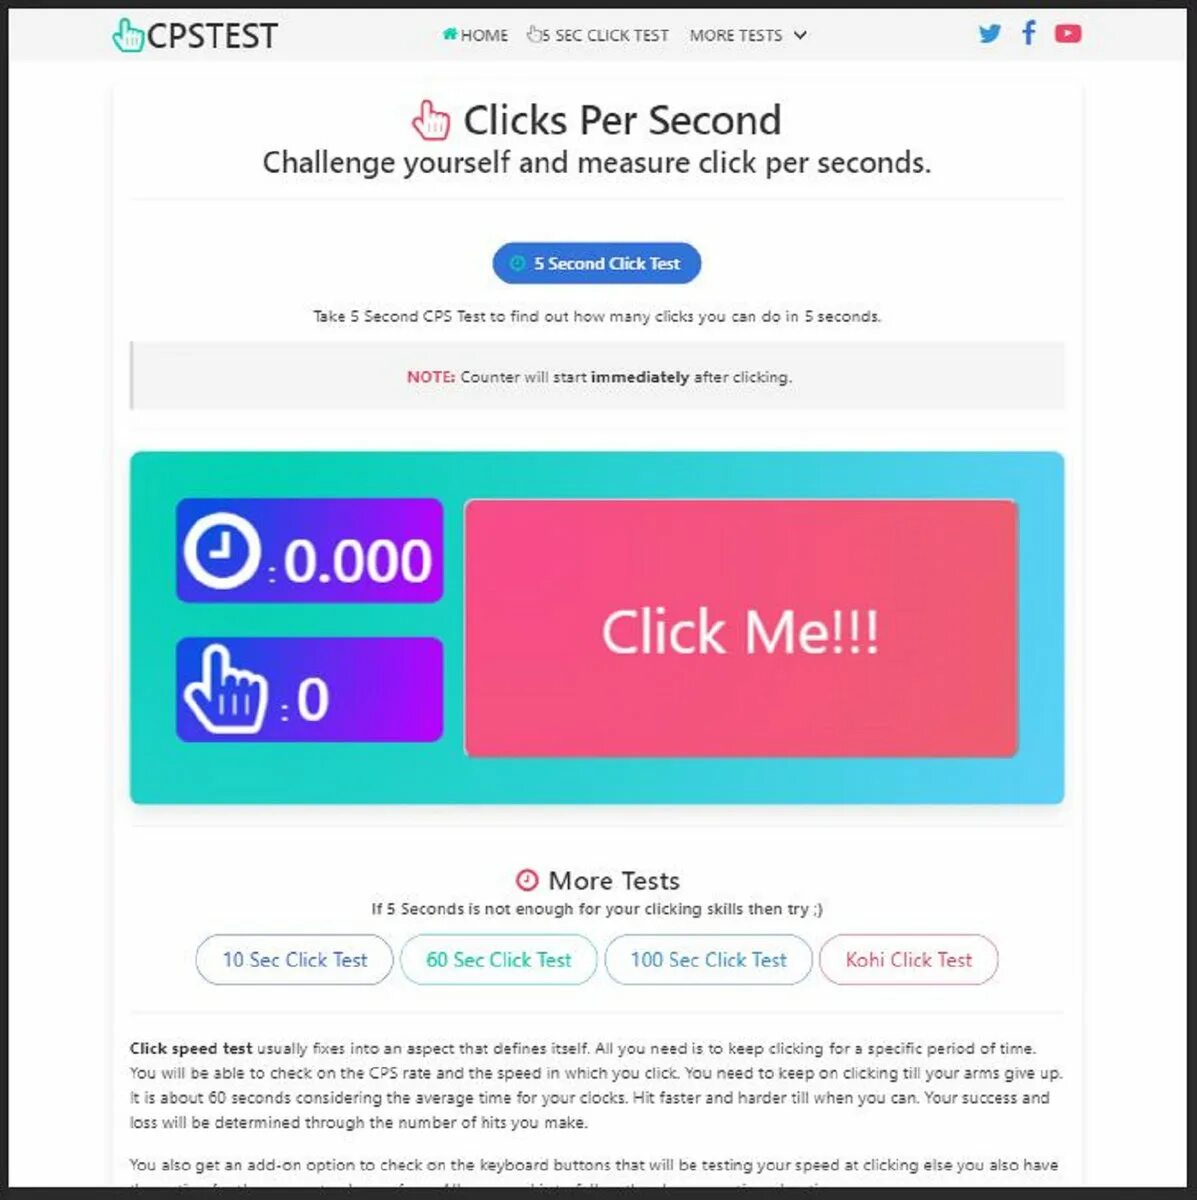 CPS Test. Click Speed Test. Click per second. CPS Test - clicks per second.